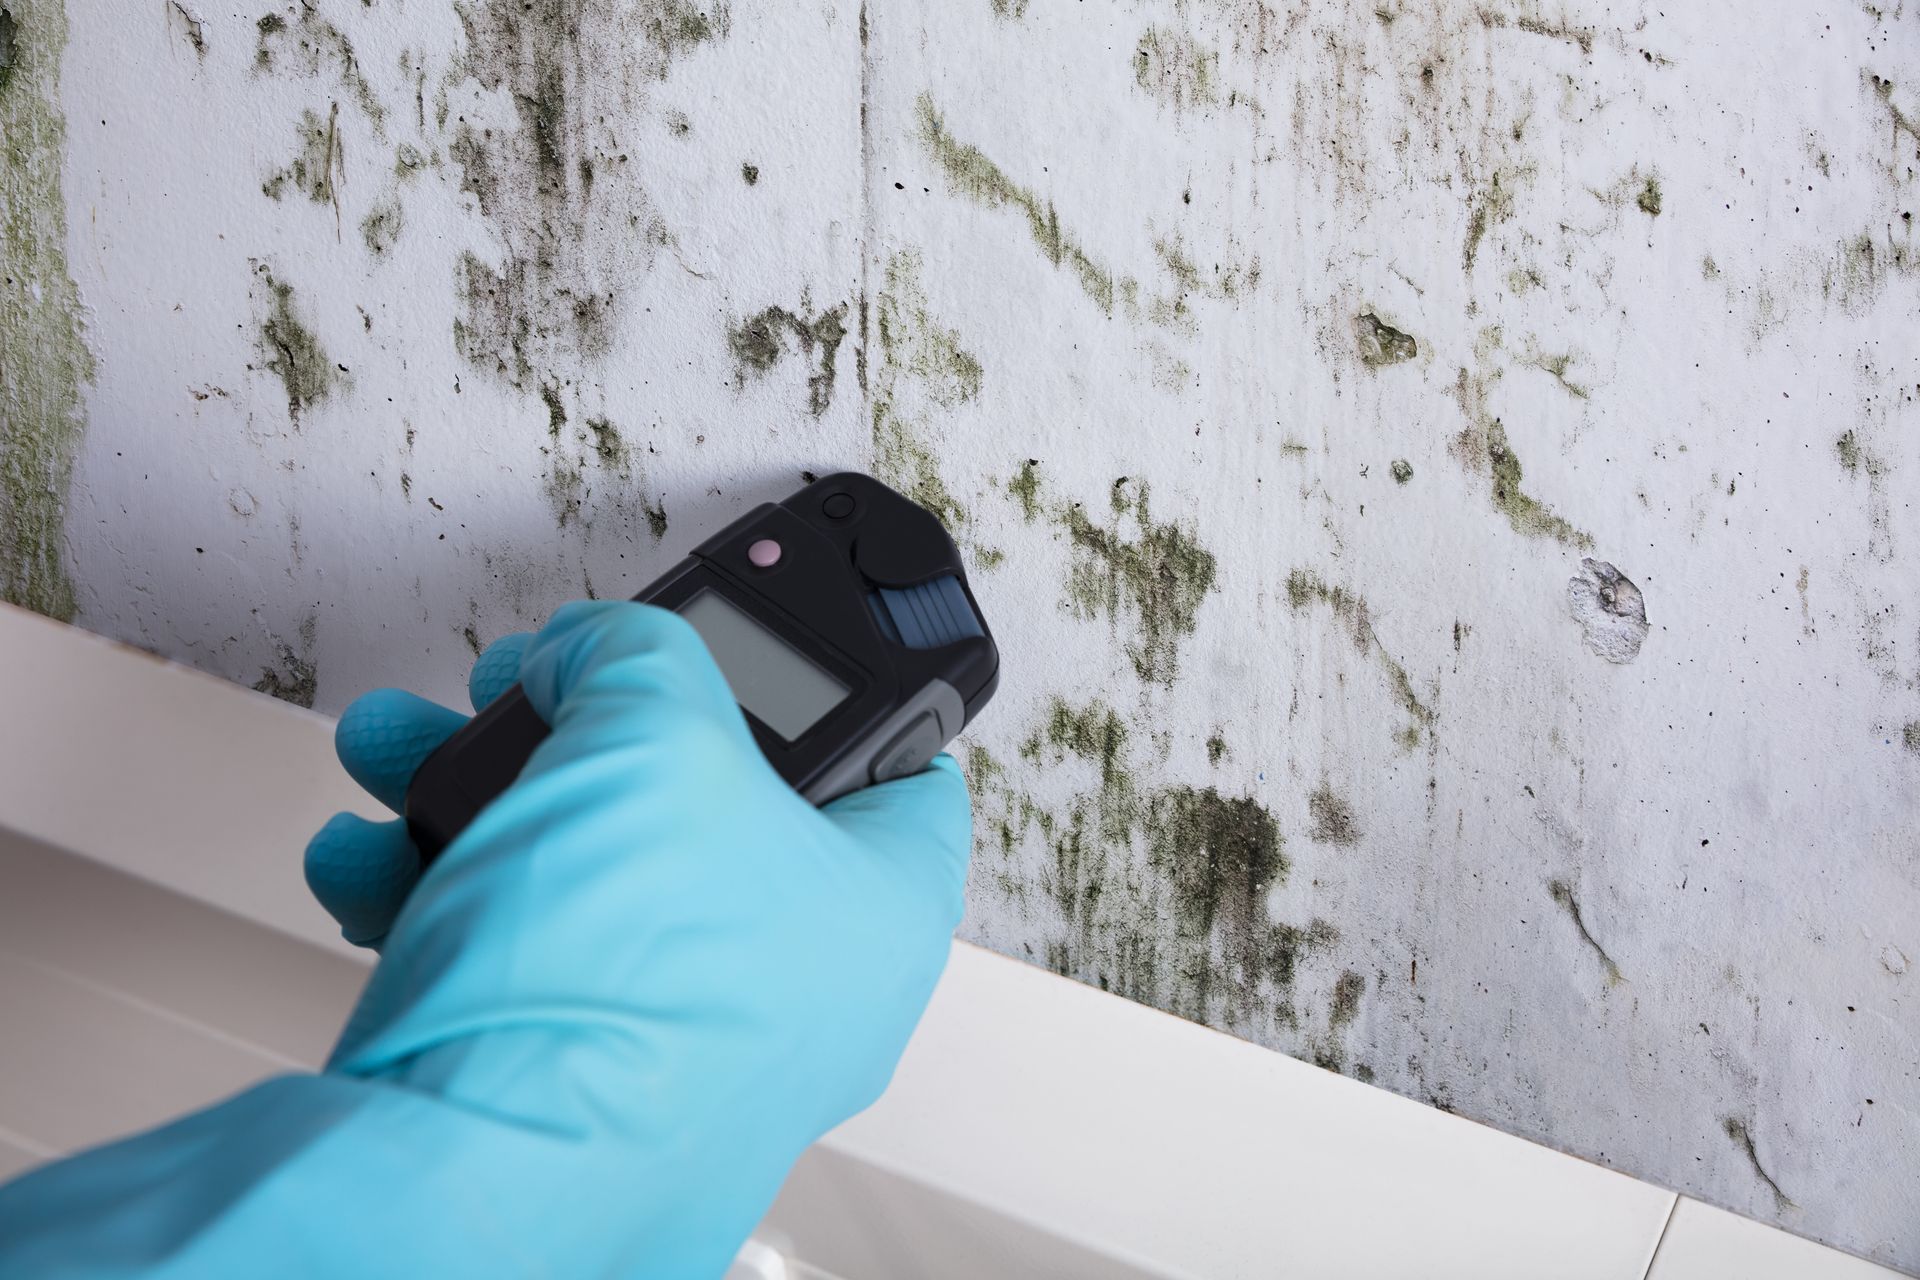 A person wearing blue gloves is holding a thermometer in front of a mouldy wall.